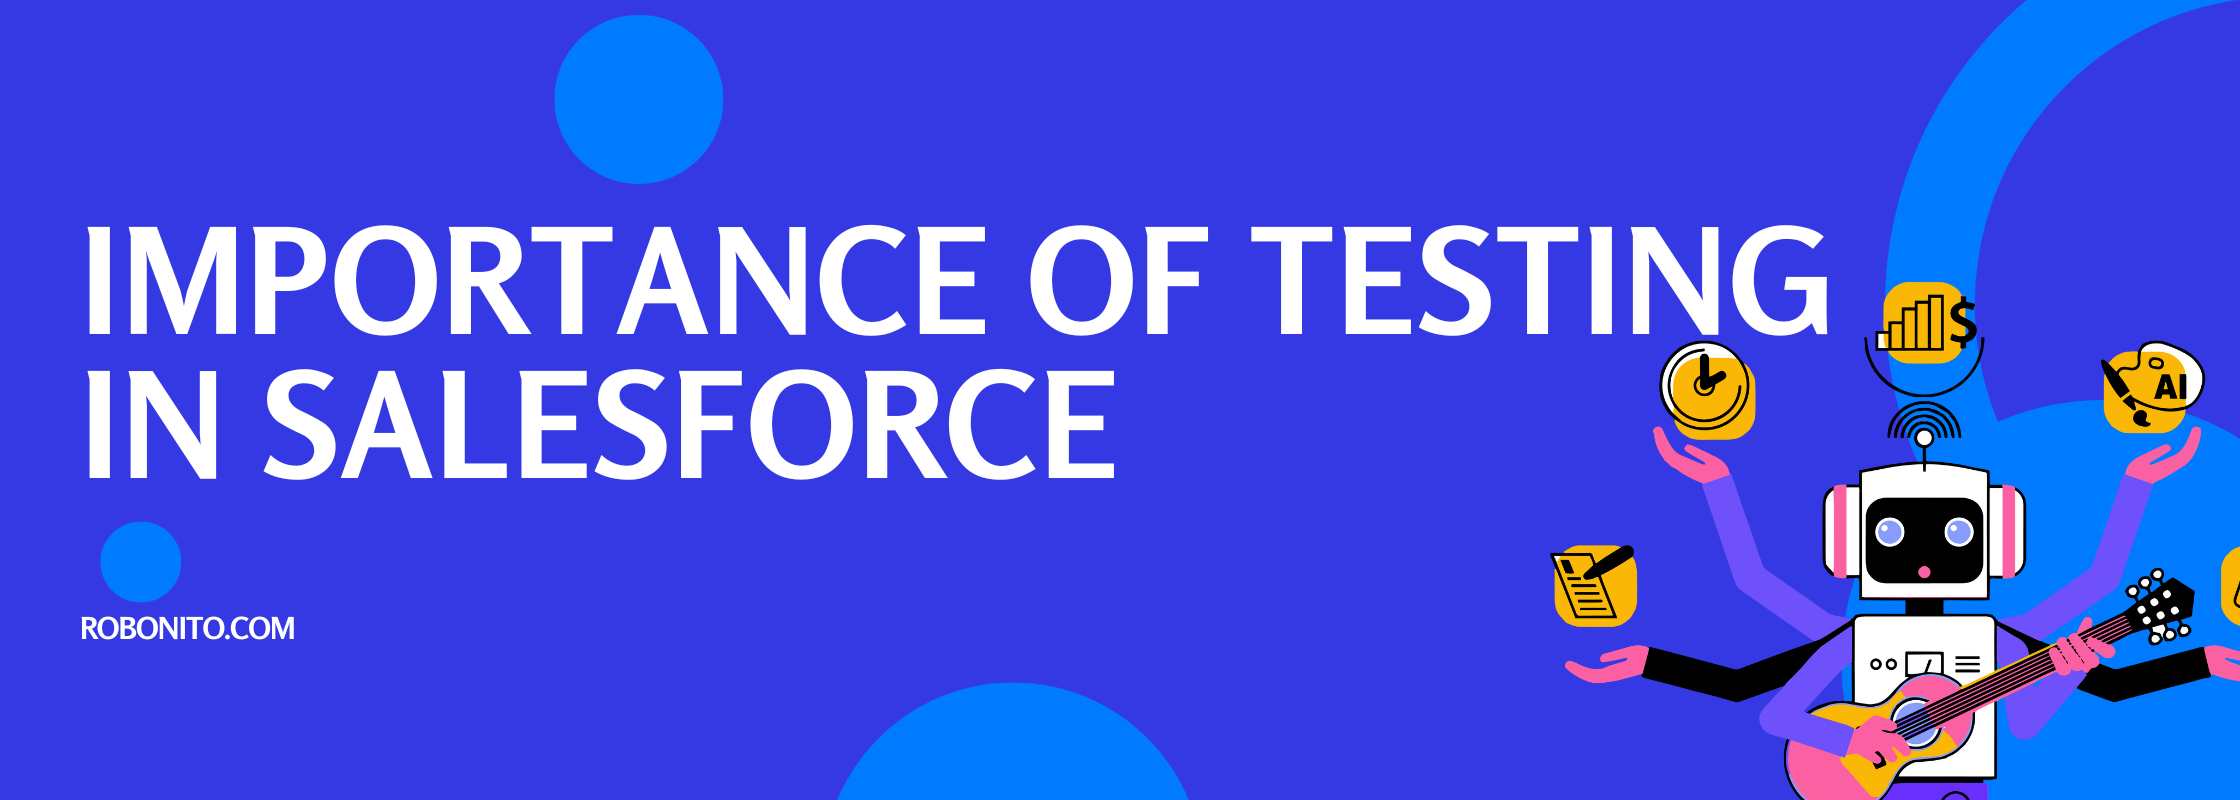 What is Salesforce Testing?